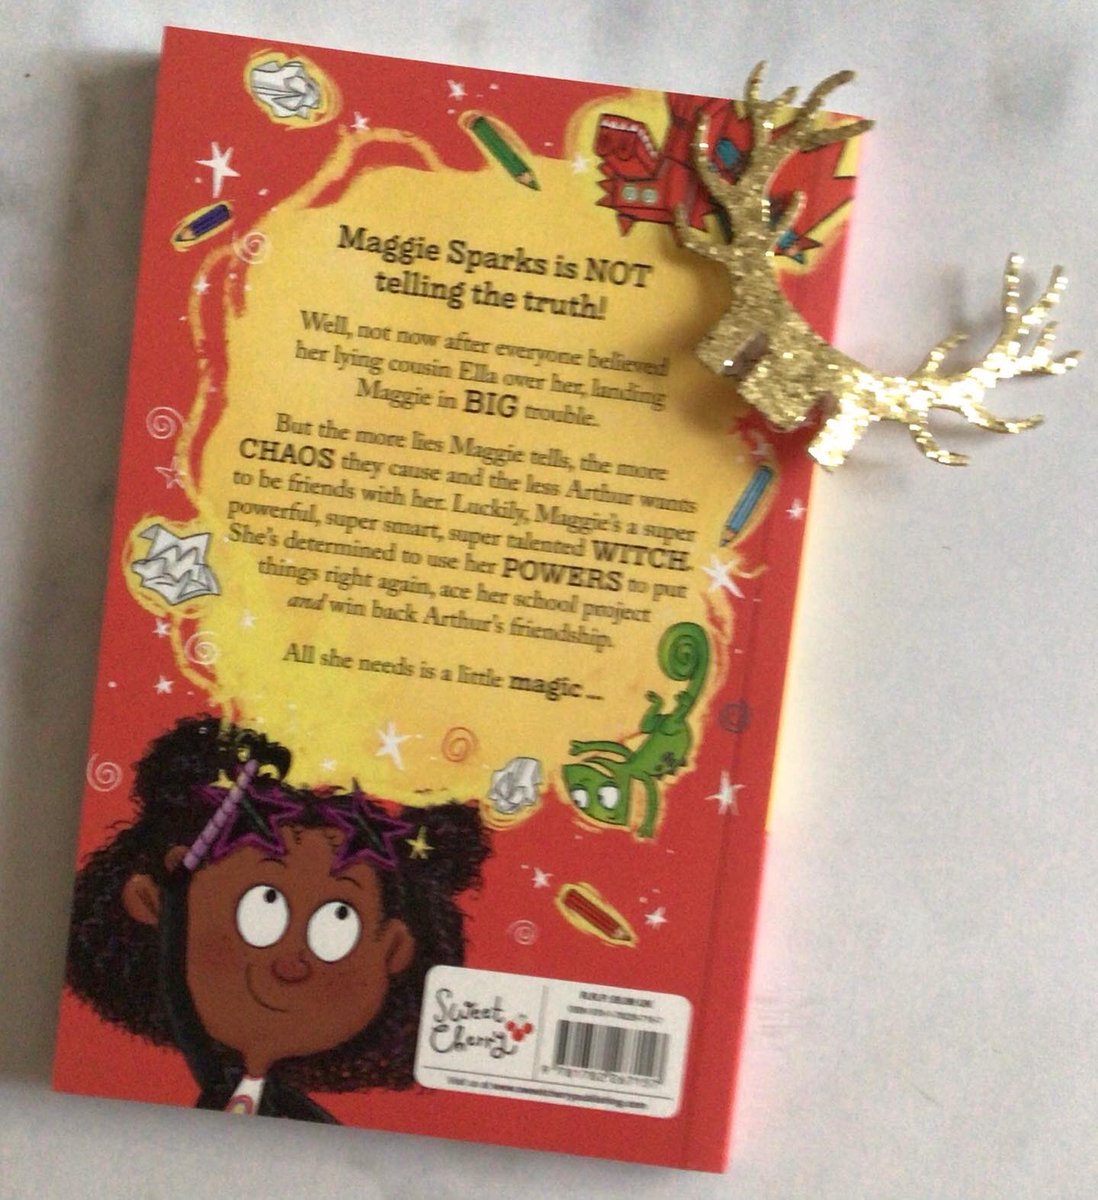 #MaggieSparks #TruthDragon #SteveSmallman @SweetCherryPub Paperback published 8th September 2022 ISBN 9781782267157 @bookread2day I loved this story so much, about Maggie Sparks who is a bit mischievous. I would love to read the whole series ￼👍
bookread2day.wordpress.com/2022/12/02/mag…